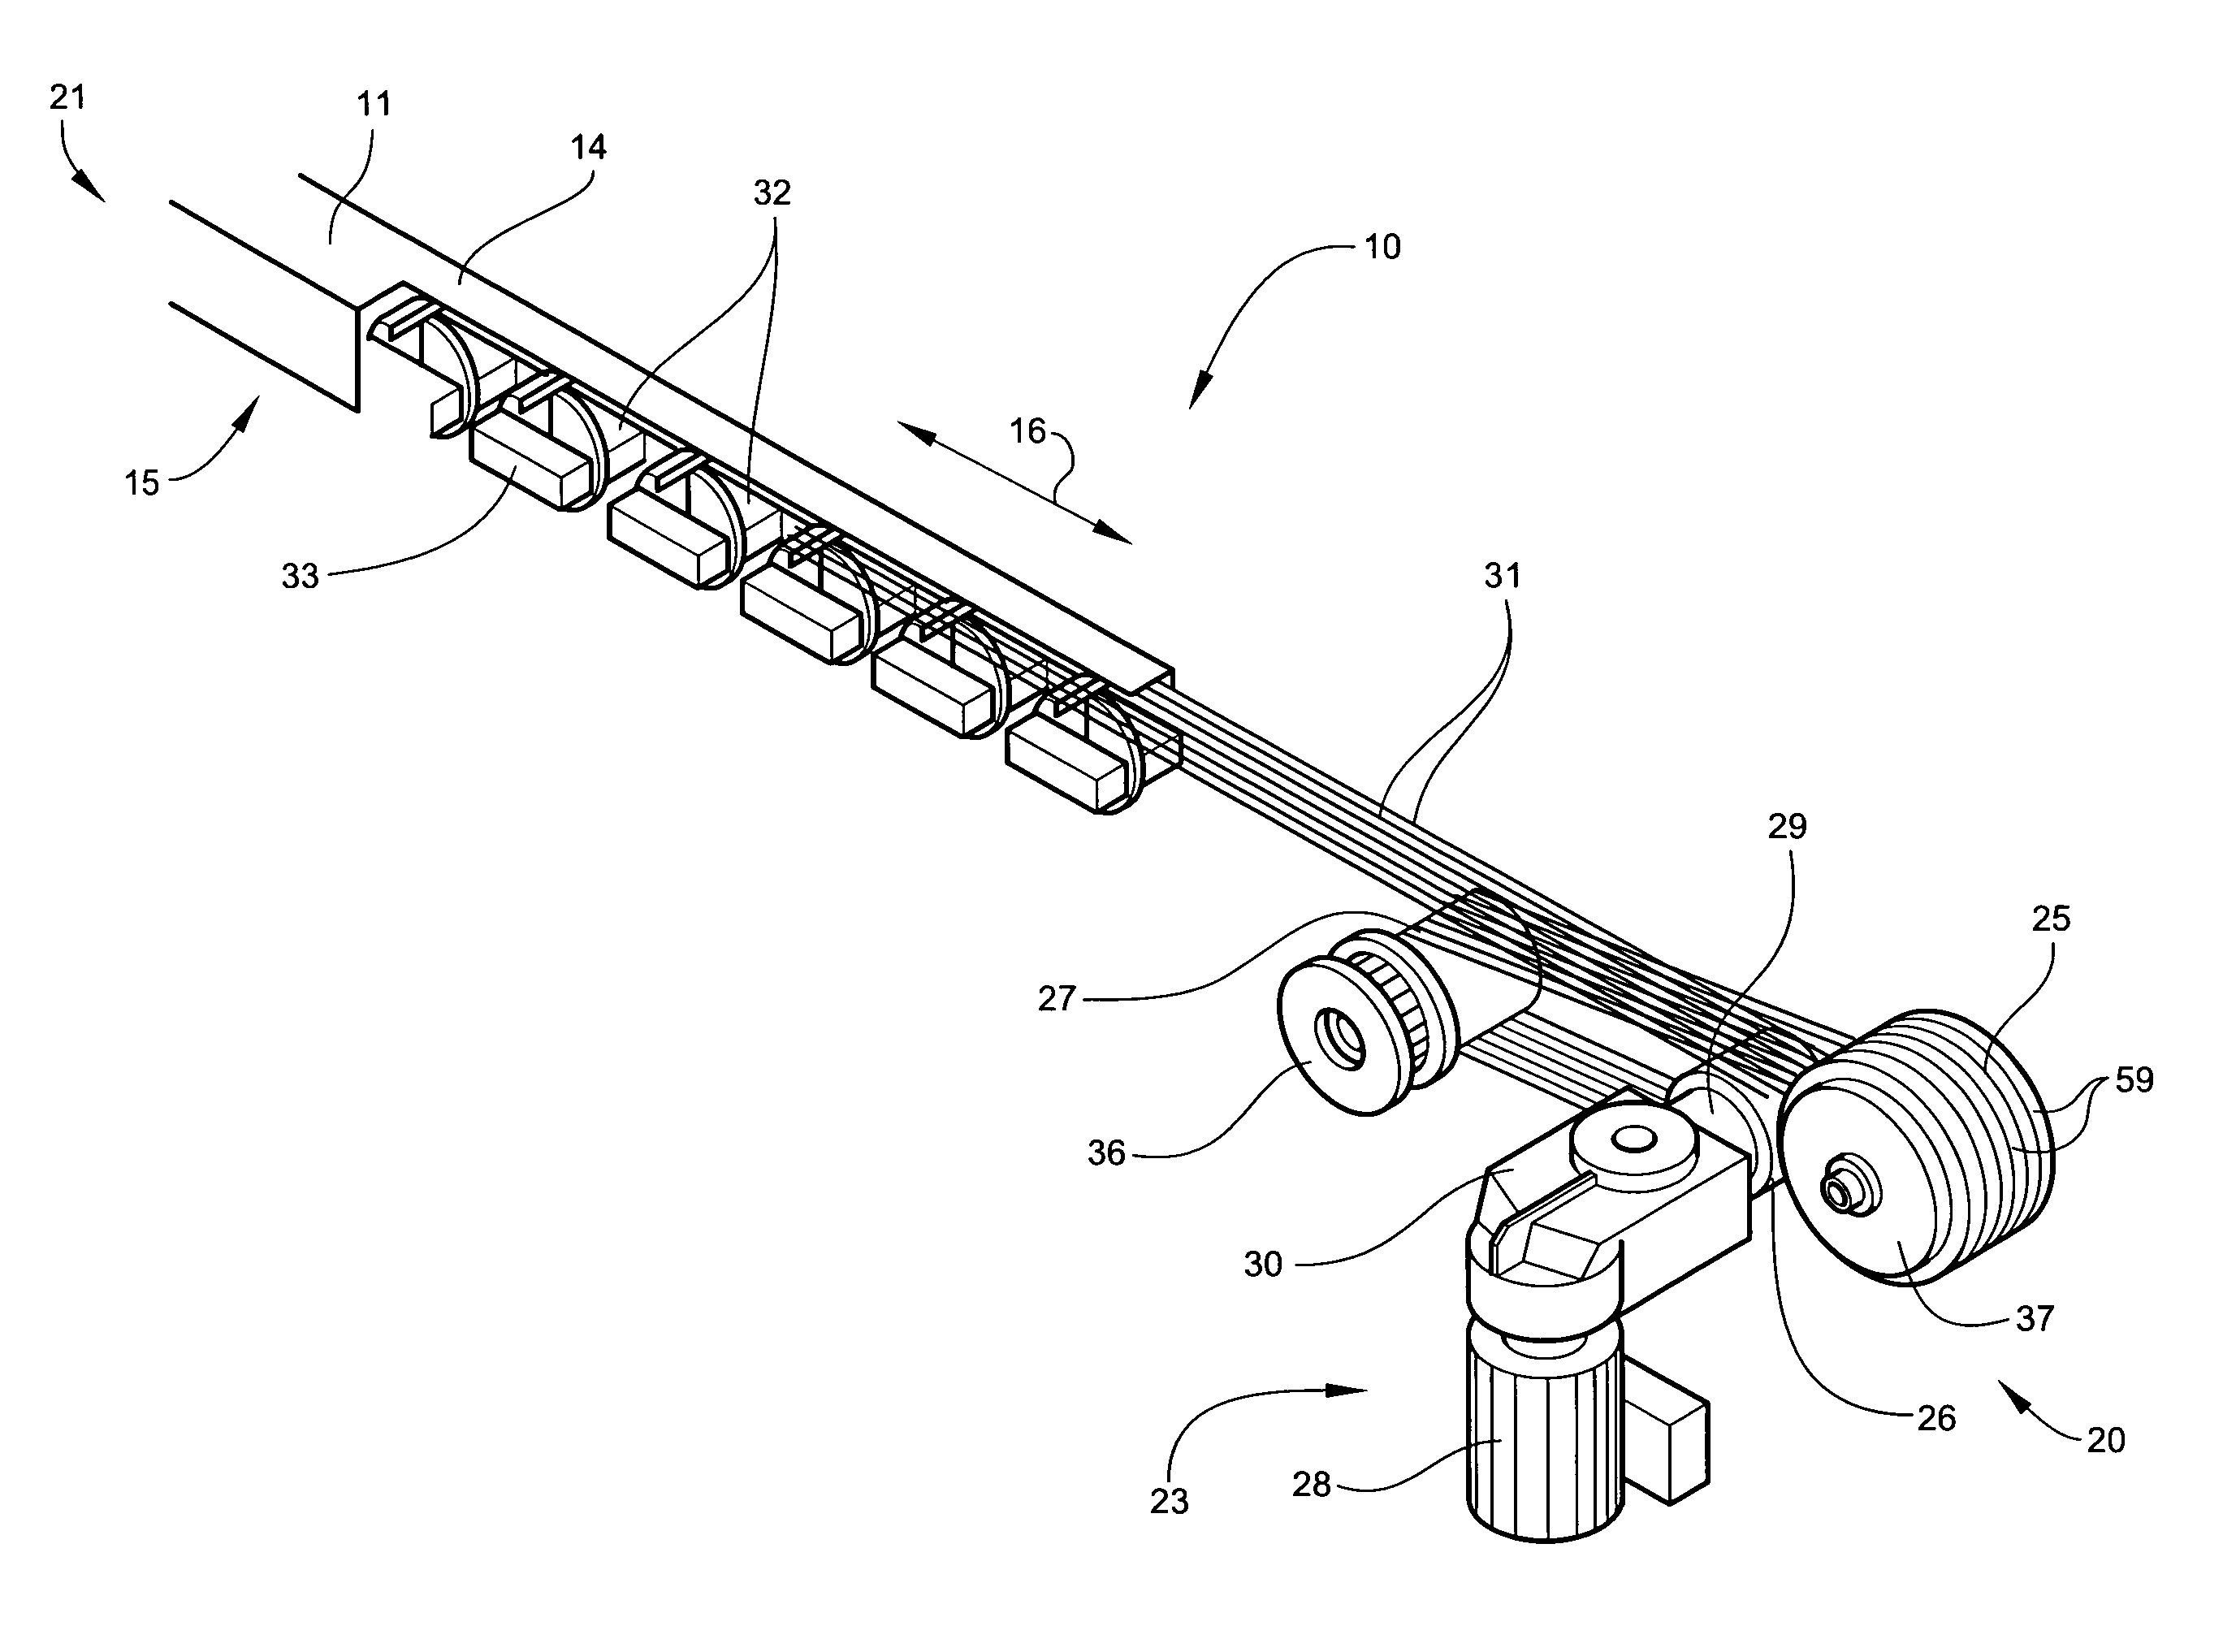 Lift assembly, system, and method